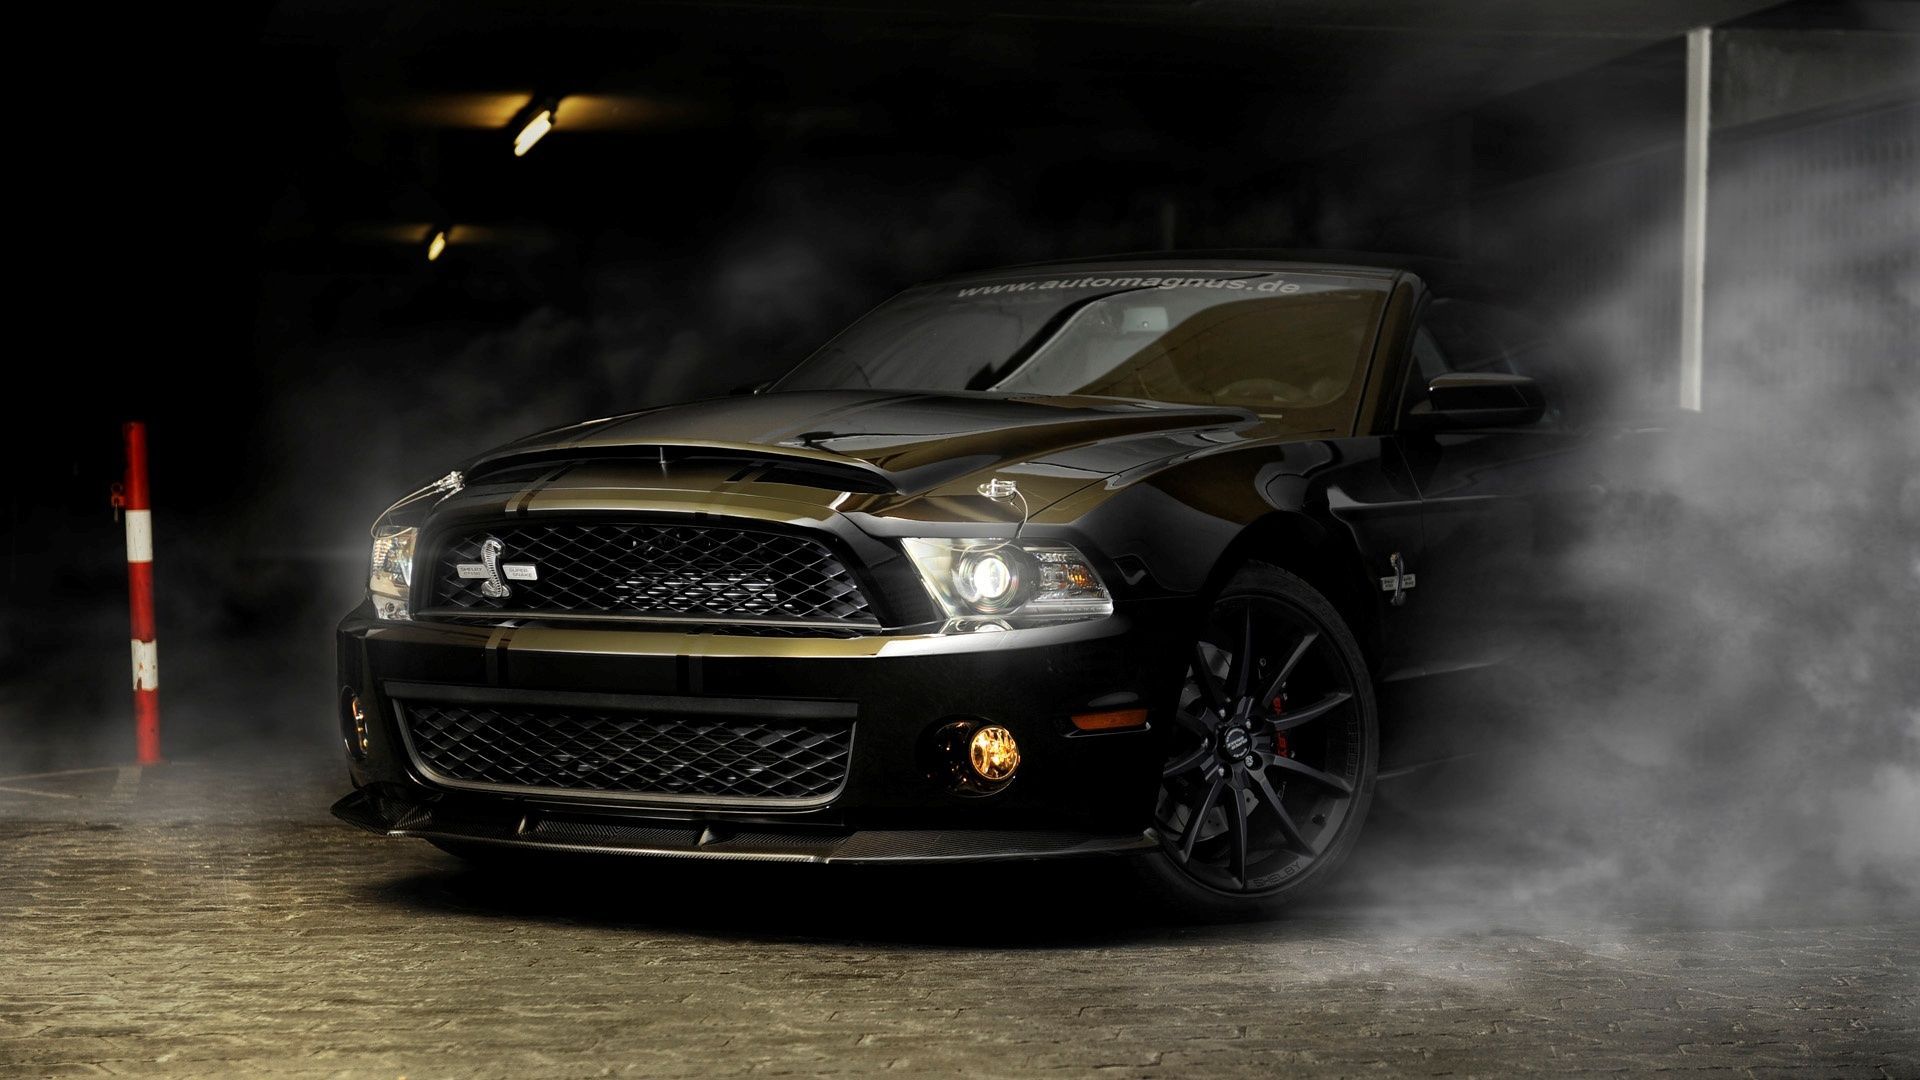 High Quality Ford Mustang Shelby Wallpaper Full HD Pictures